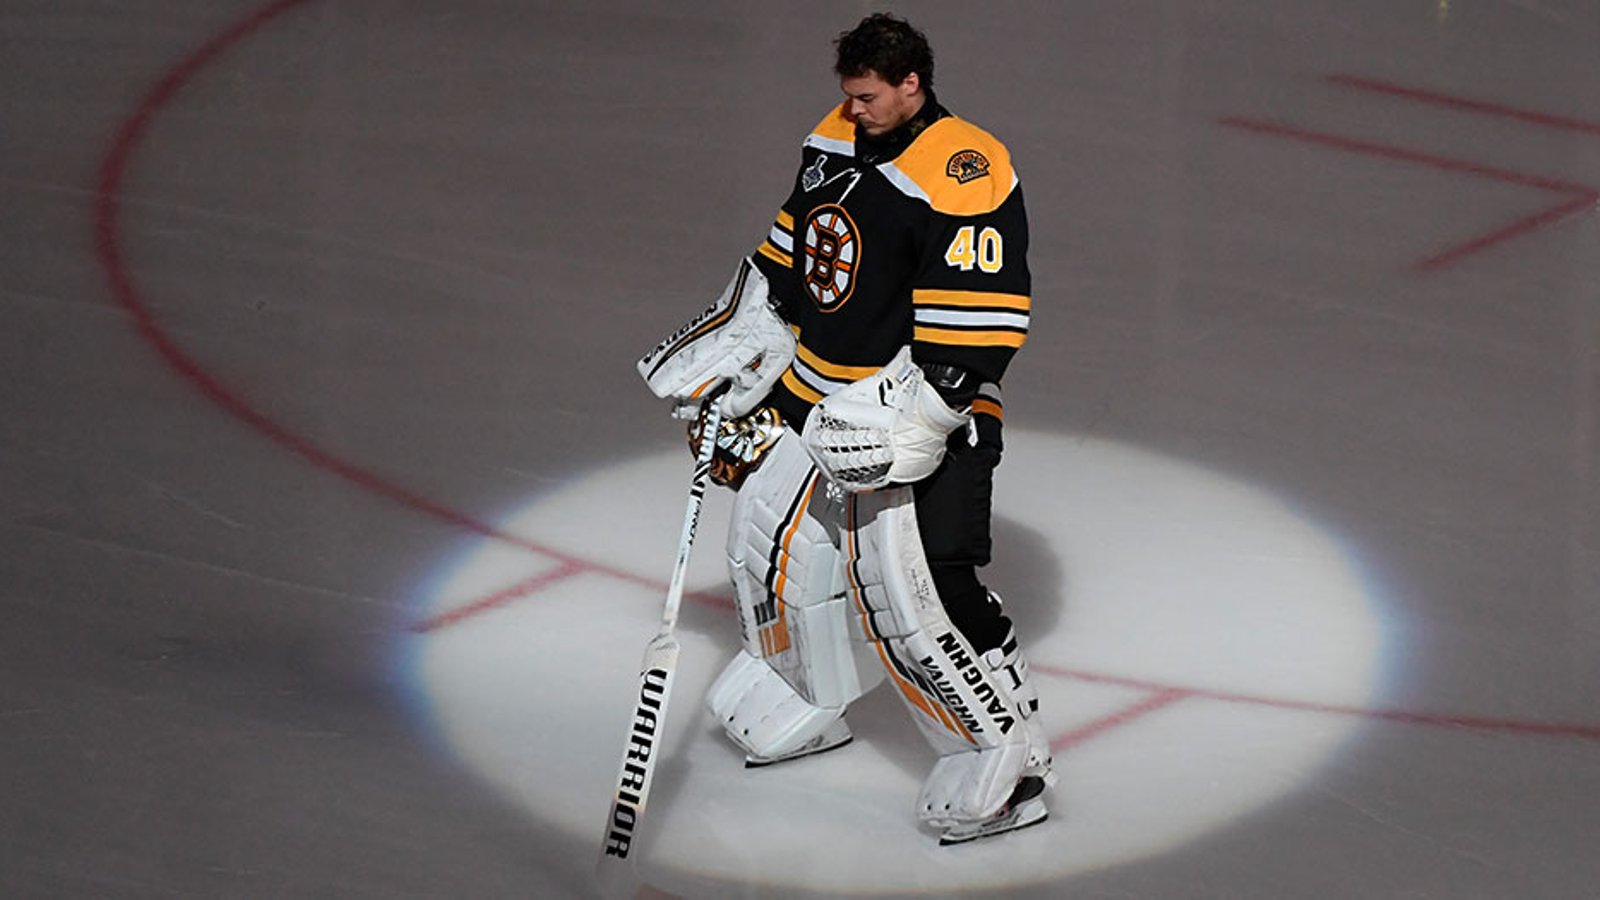 Rask celebrates his day with “the Cup” and Bruins fans lose their minds